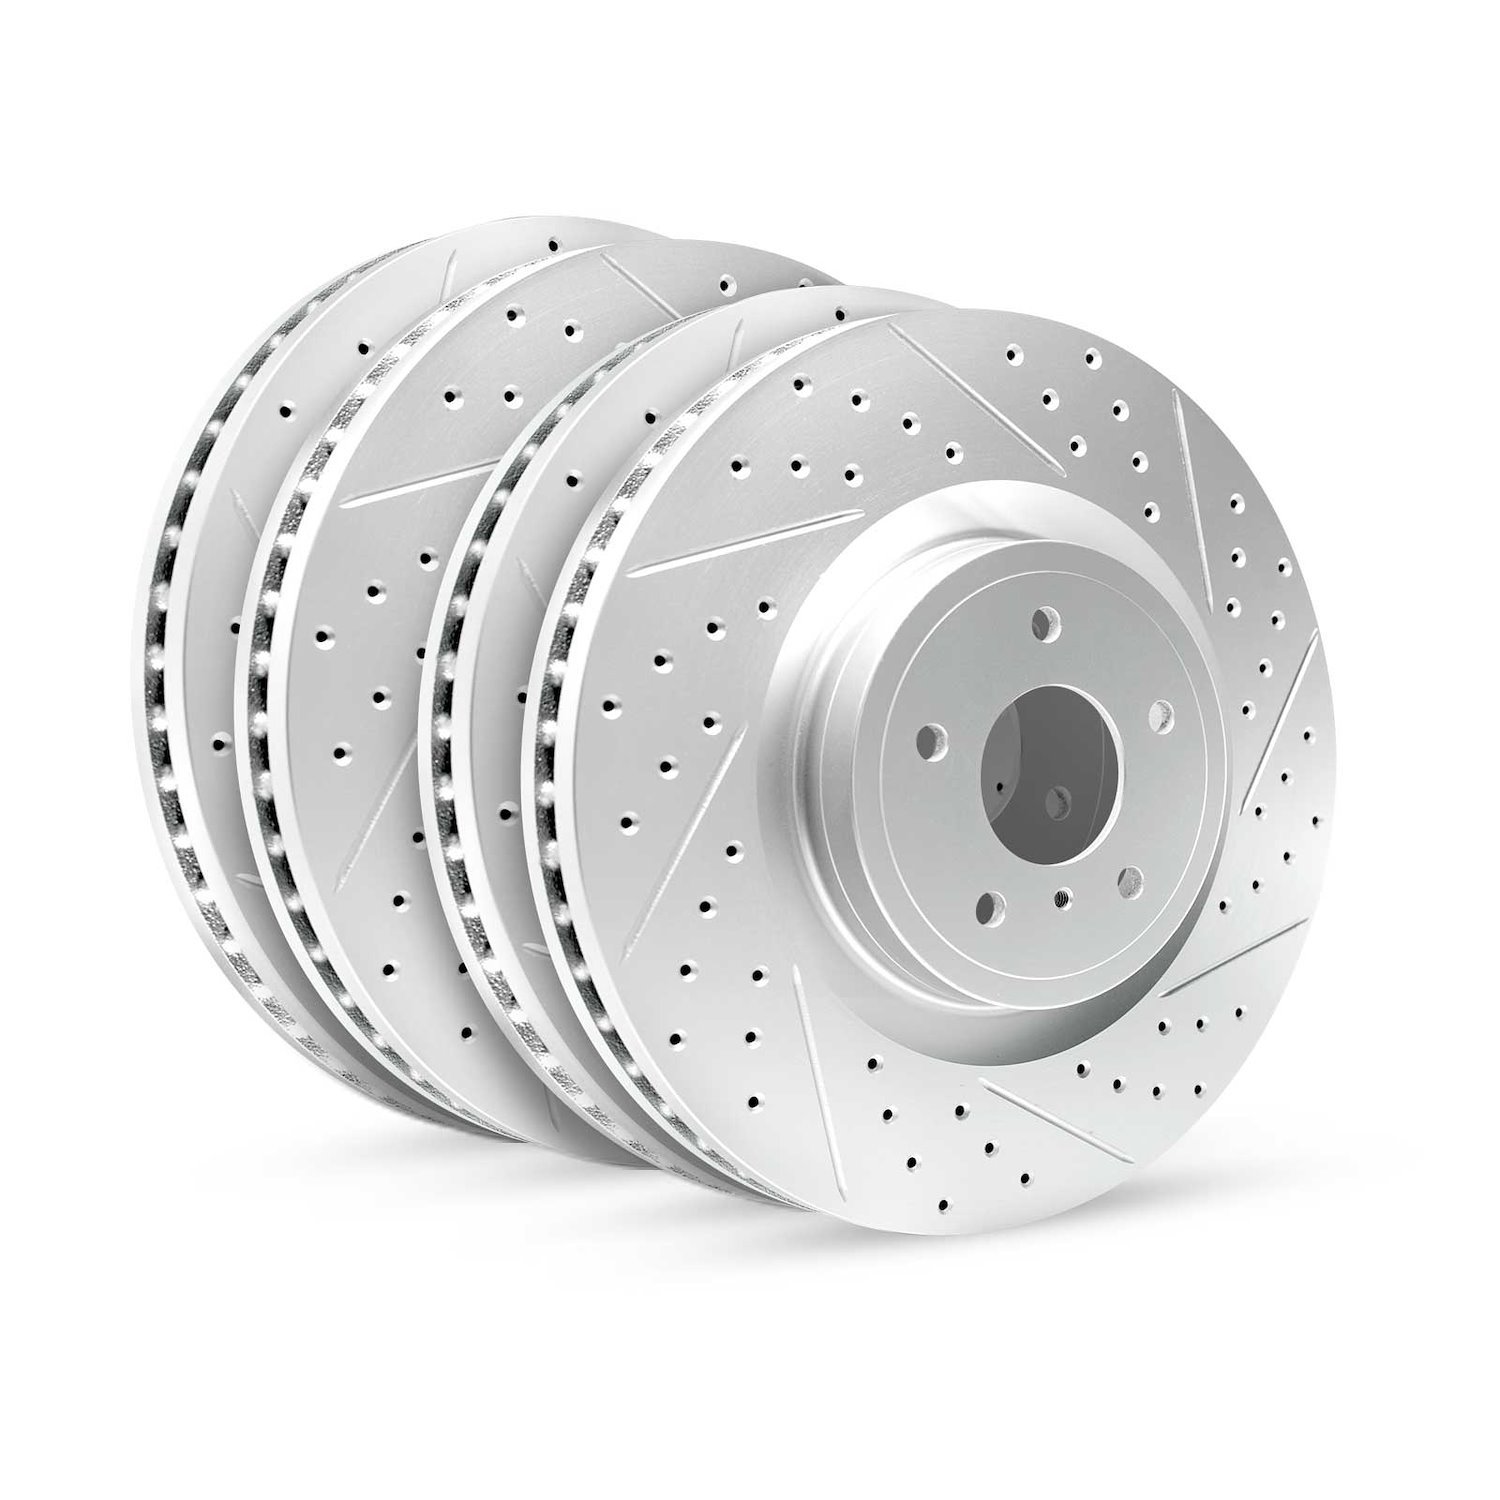 GEO-Carbon Drilled/Slotted Rotor/Drums, Fits Select